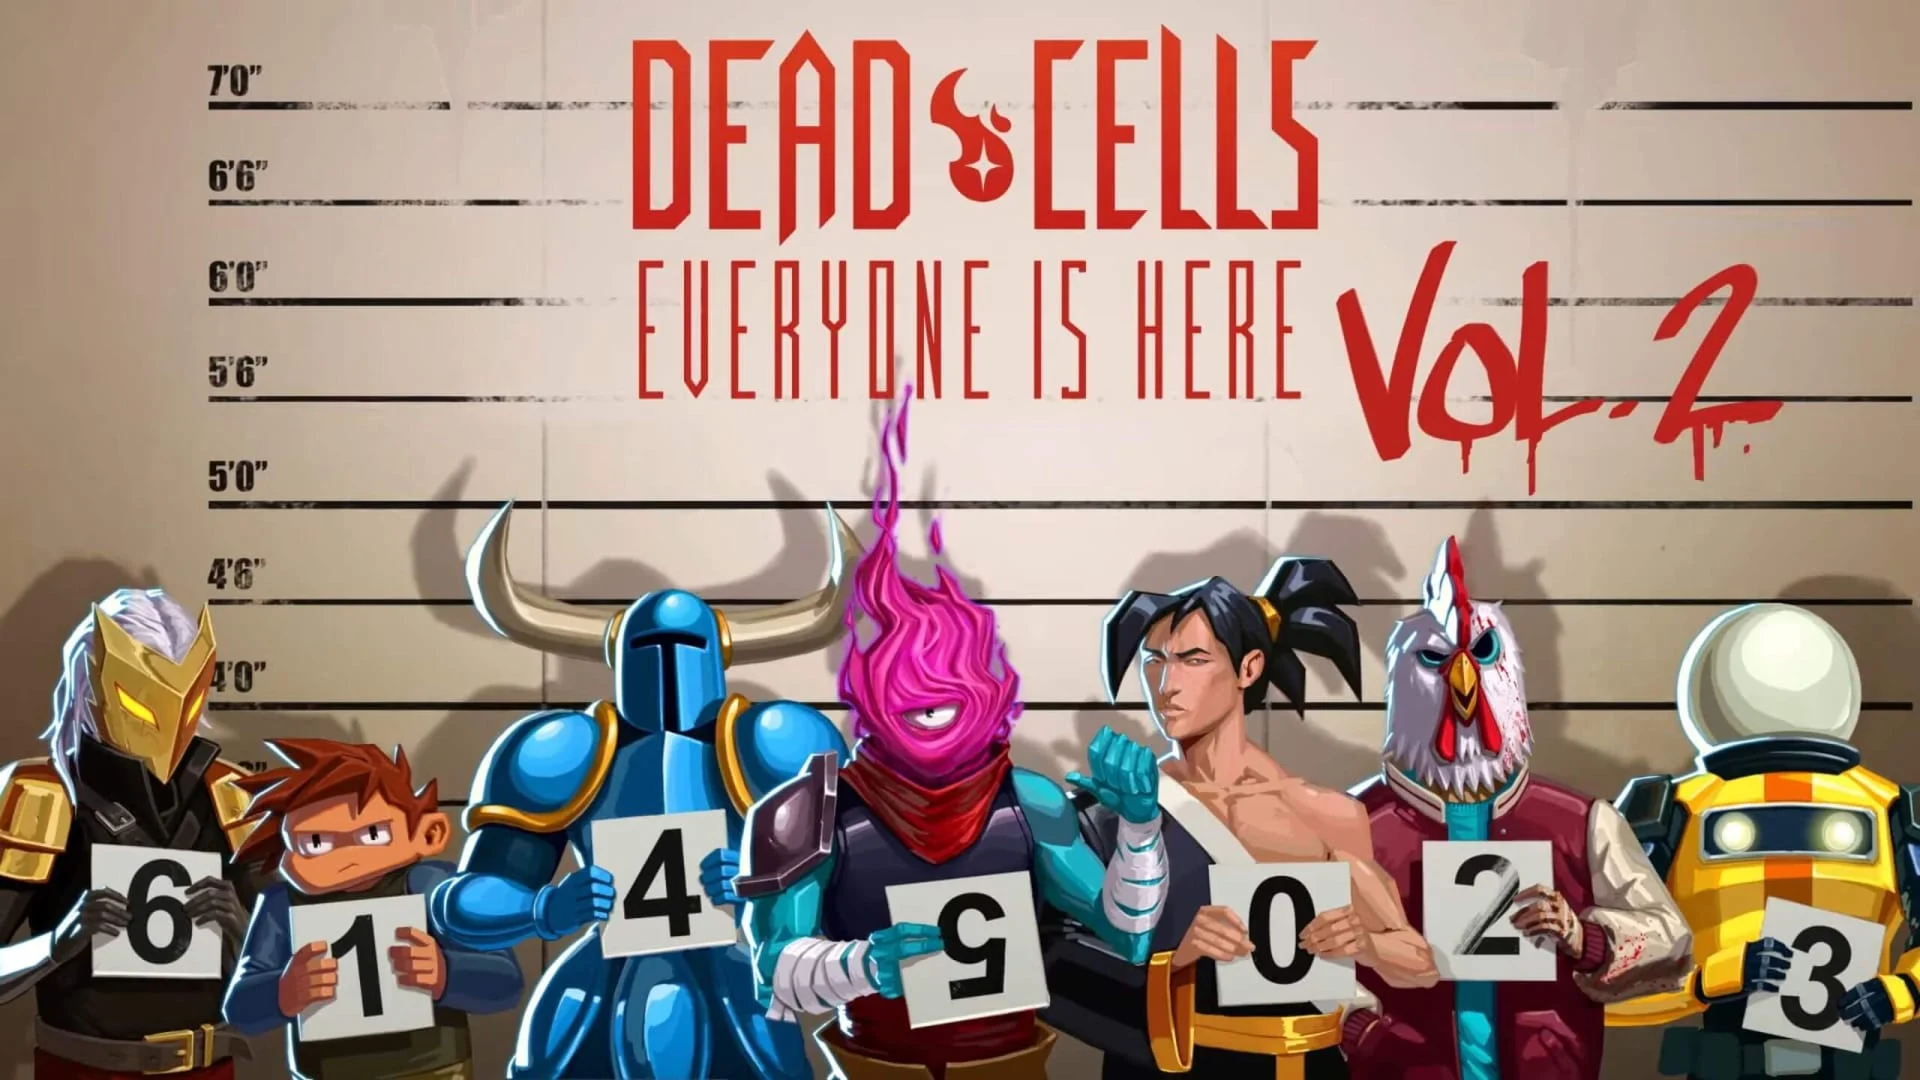 Dead Cells: Everyone is Here Vol II Gameplay Trailer Brings Shovel Knight,  Hotline Miami, and More in New Update - Gameranx